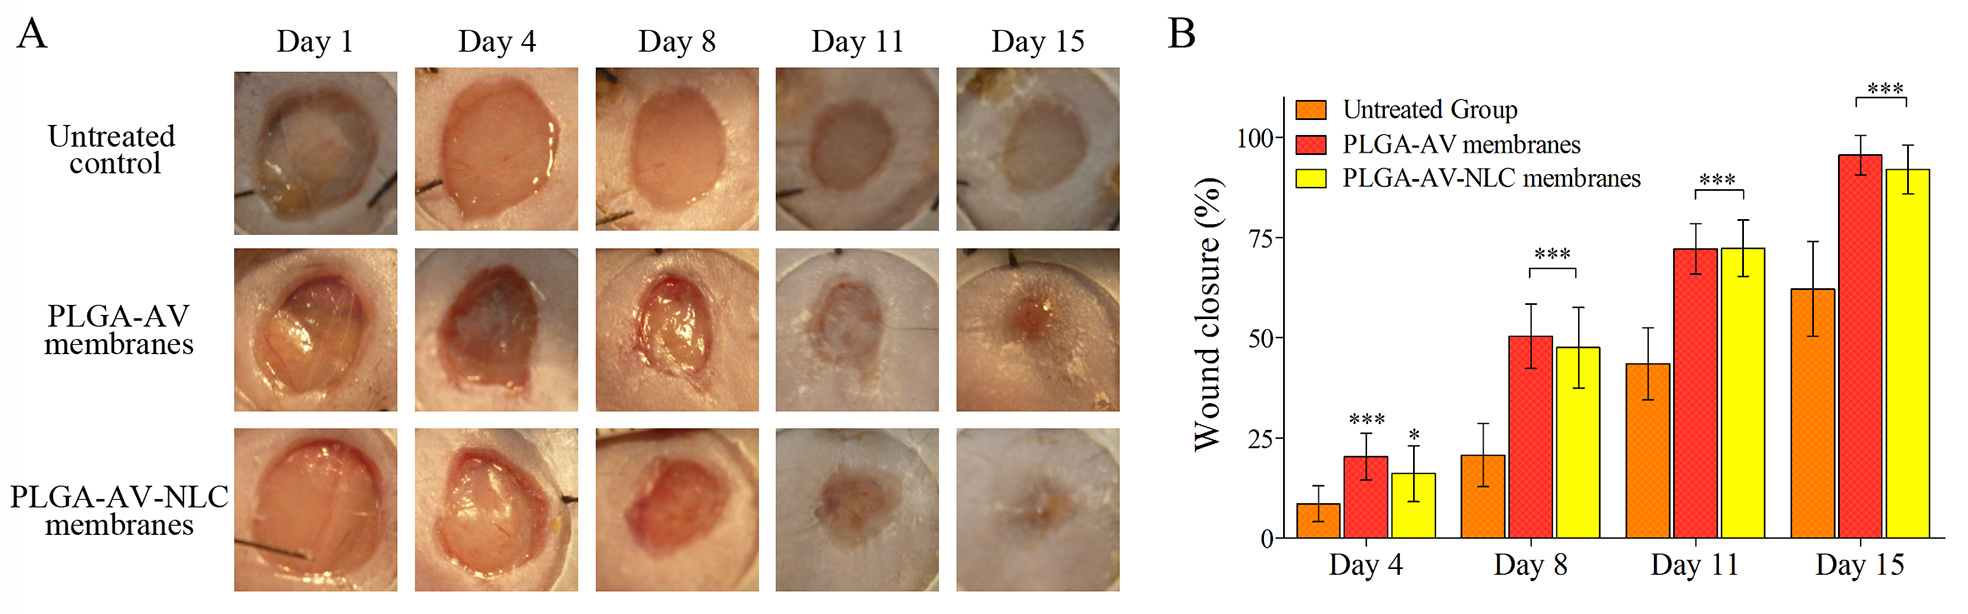 In vivo wound closure. (A) Wounds photographs of each group on days 1, 4, 8, 11 and 15. (B) Wound closure represented as the percentage of reduction of the initial area on days 4, 8, 11 and 15 postinjury.